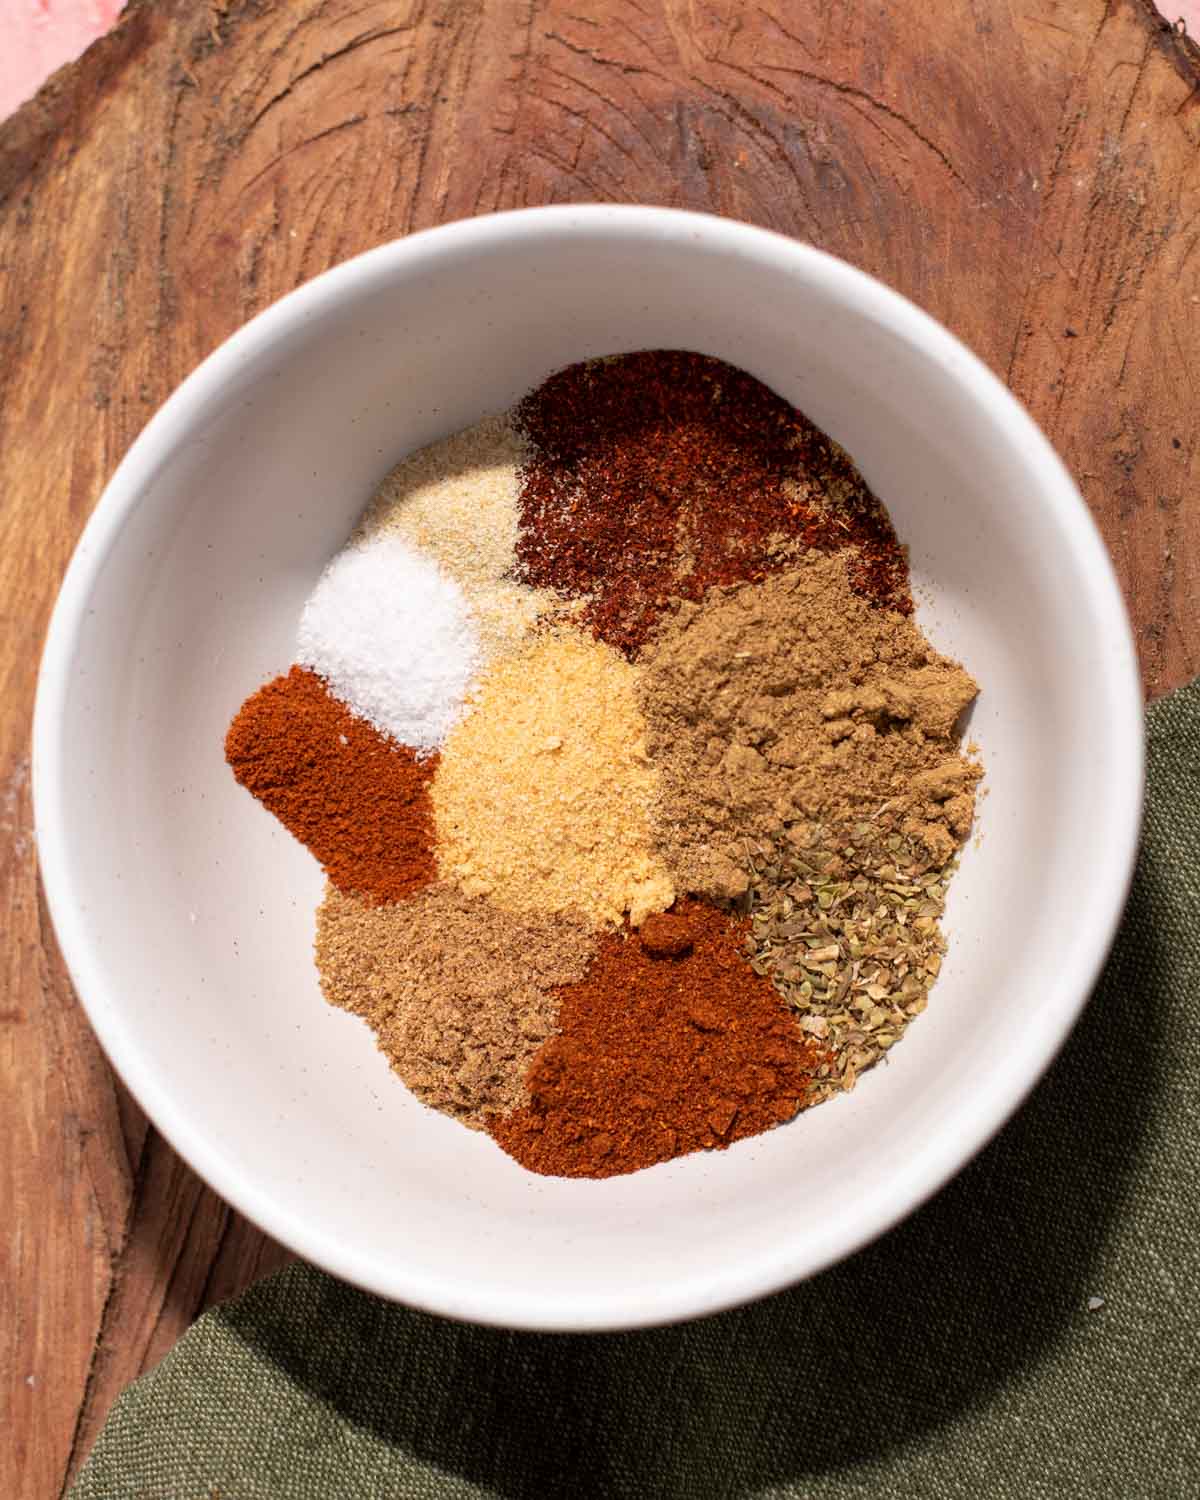 White bowl filled with variety of spices on a wooden background.